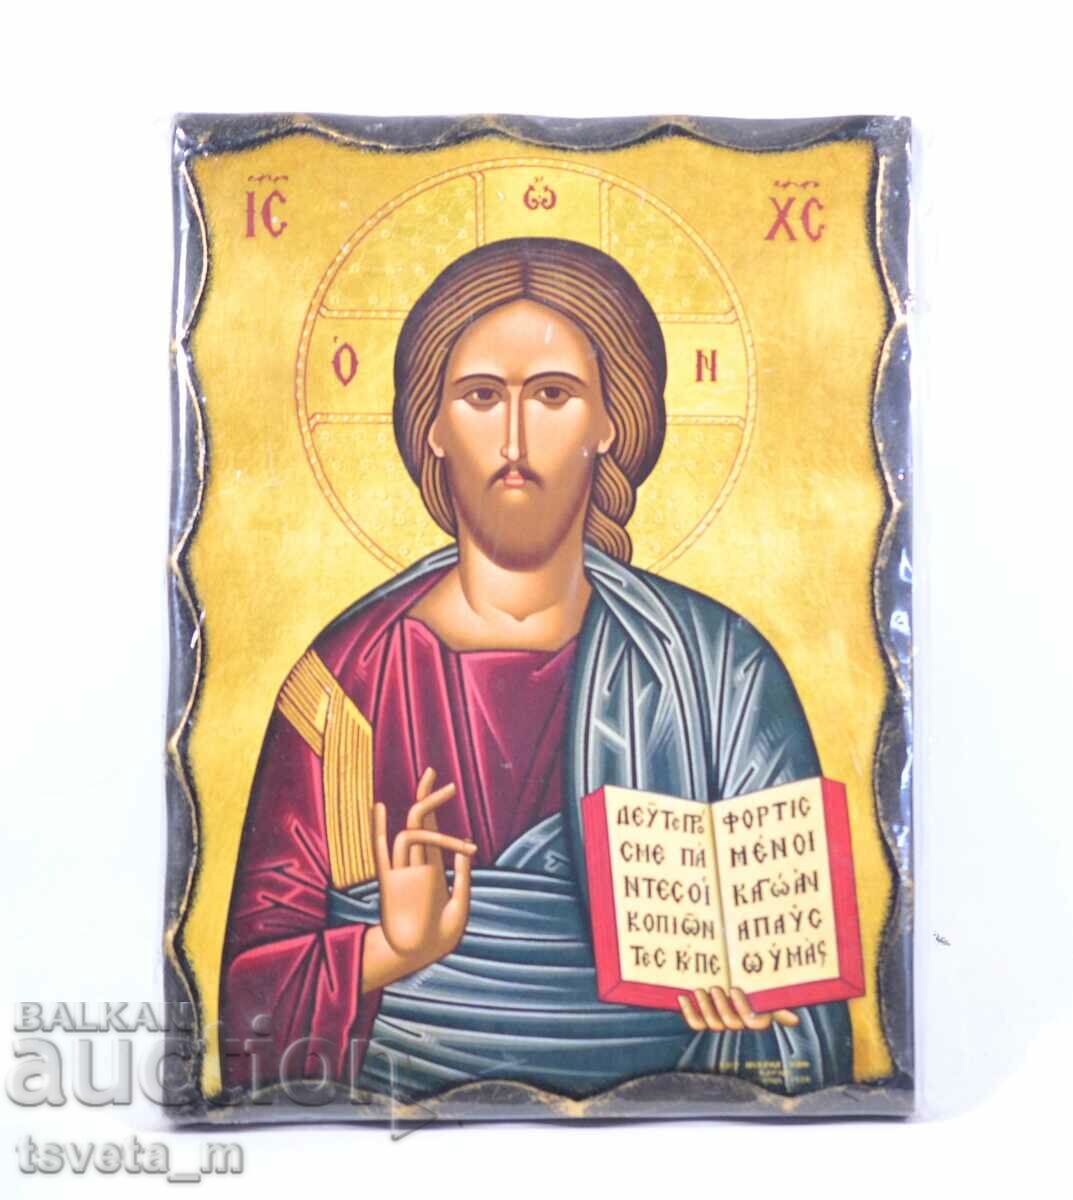 An exact copy of an ancient Byzantine icon, handmade